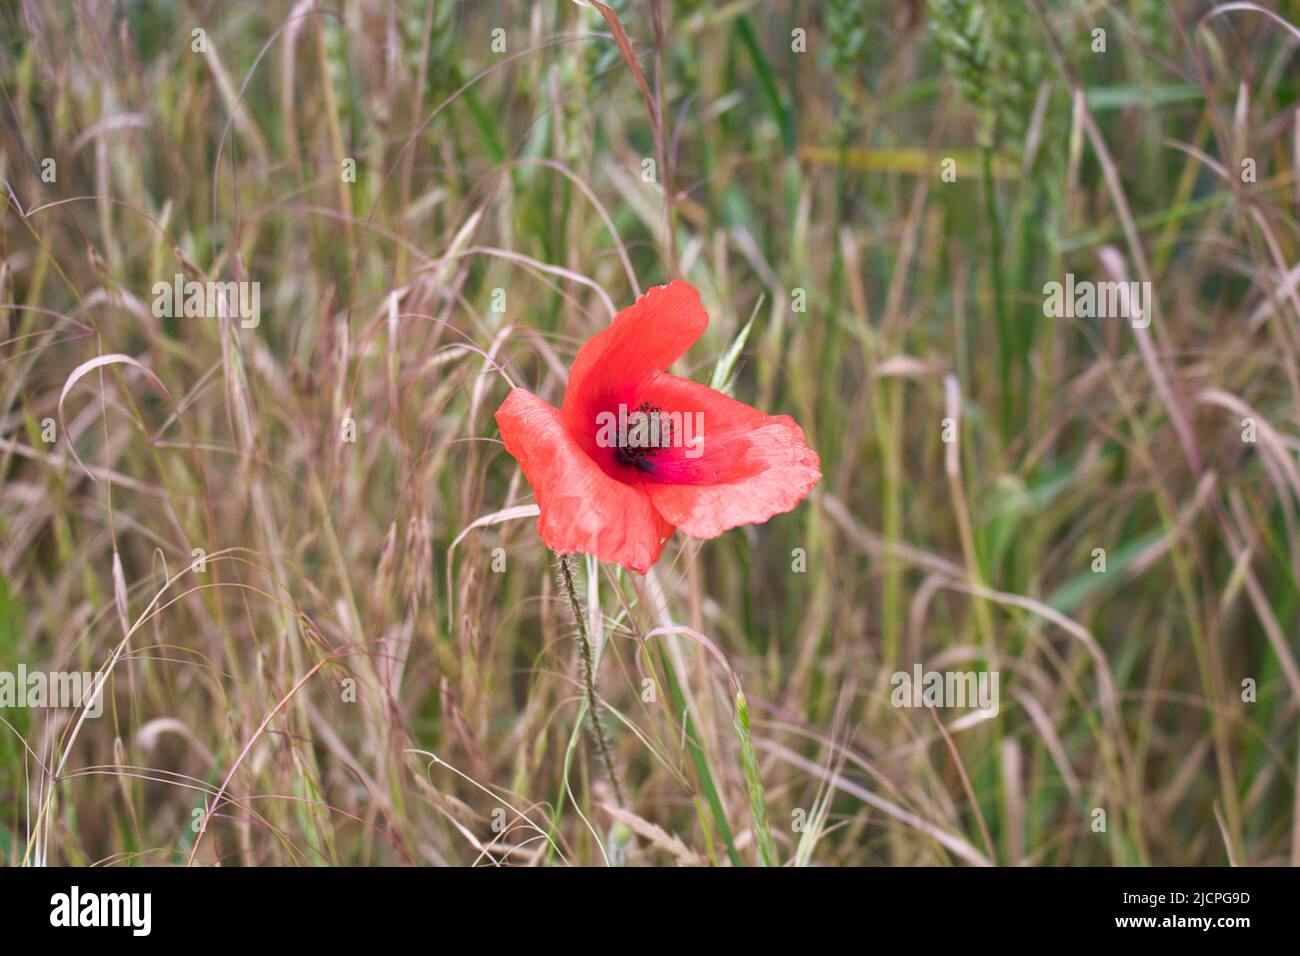 A poppy red bloom in detail view. Stock Photo